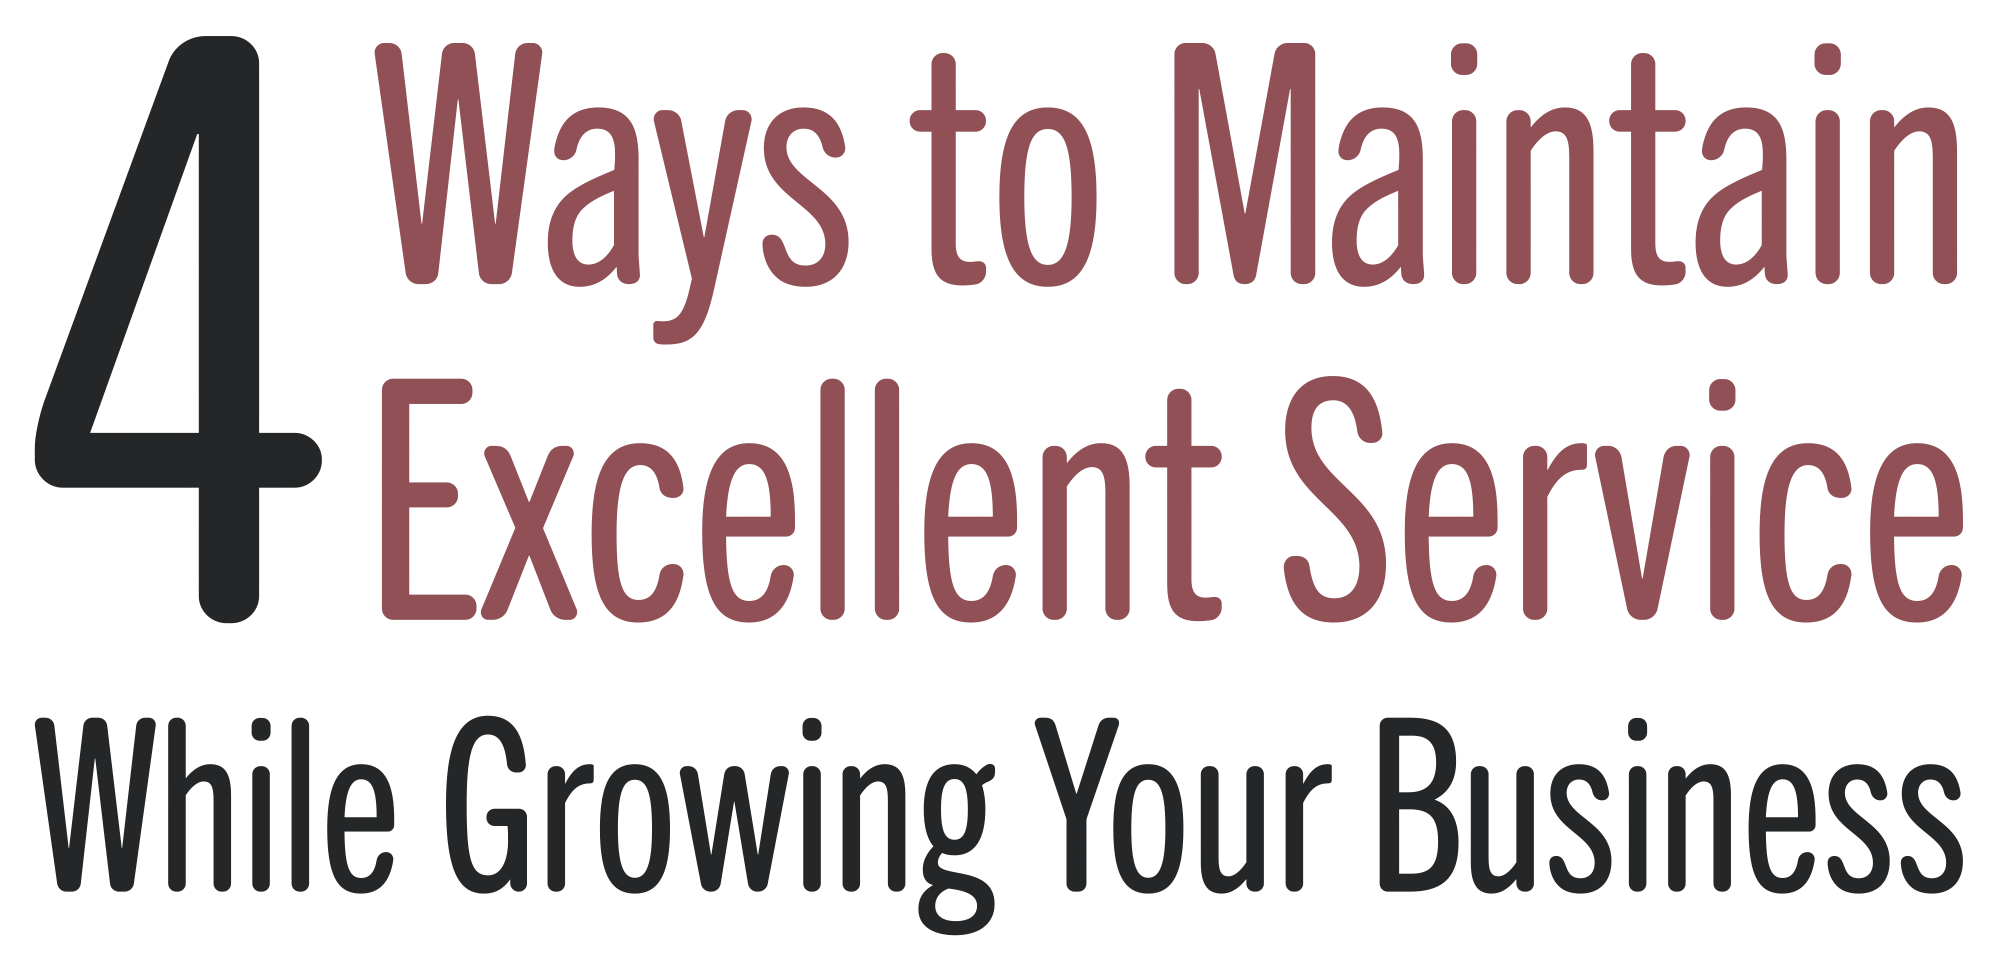 4 Ways to Maintain Excellent Service